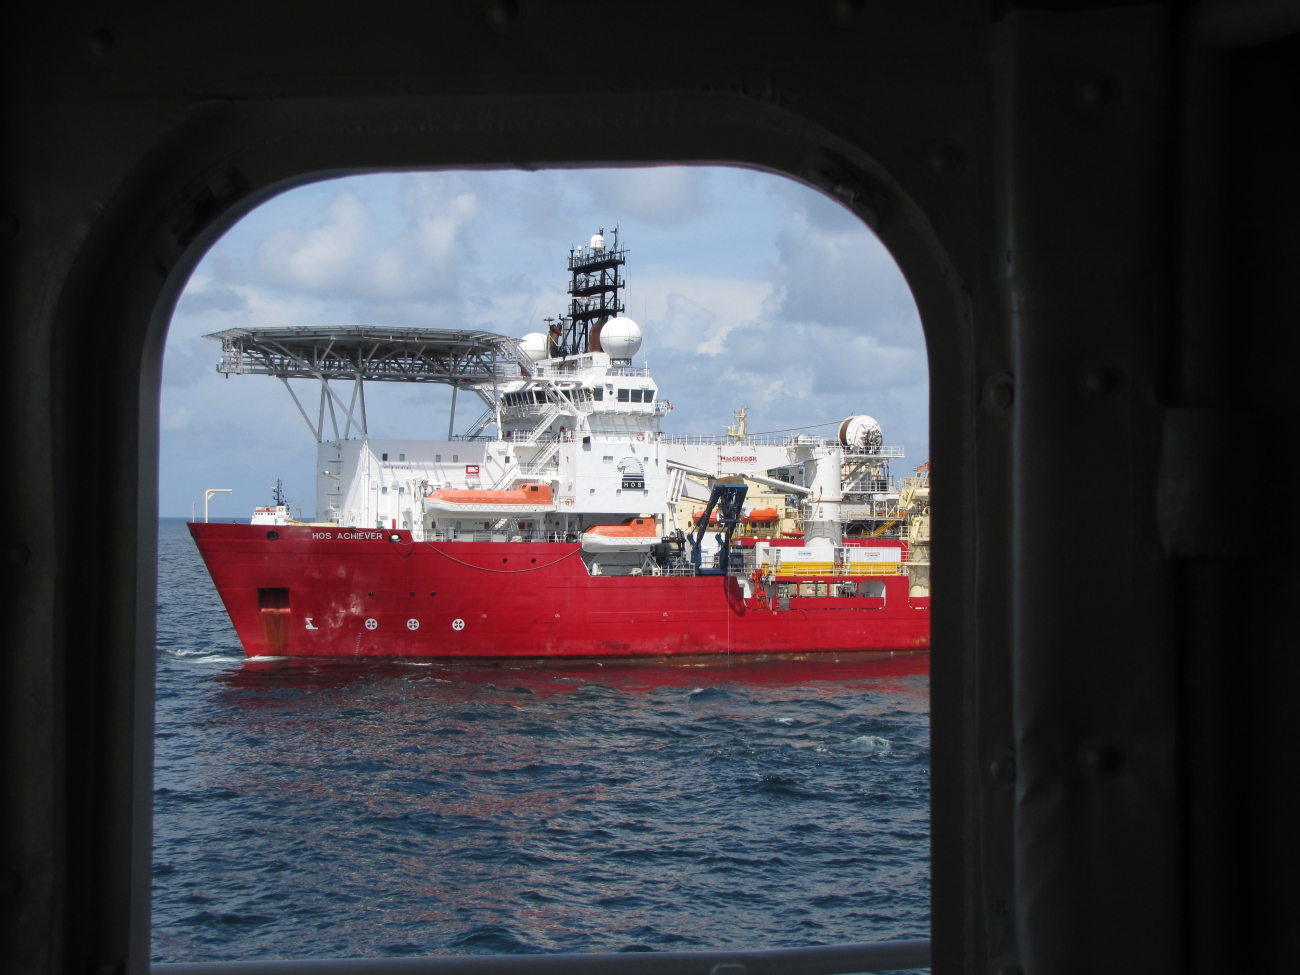 A view of the proximity of oil field work vessels from the bridge of theNOAA Ship PISCES during operations at the Deepwater Horizon oil spill site